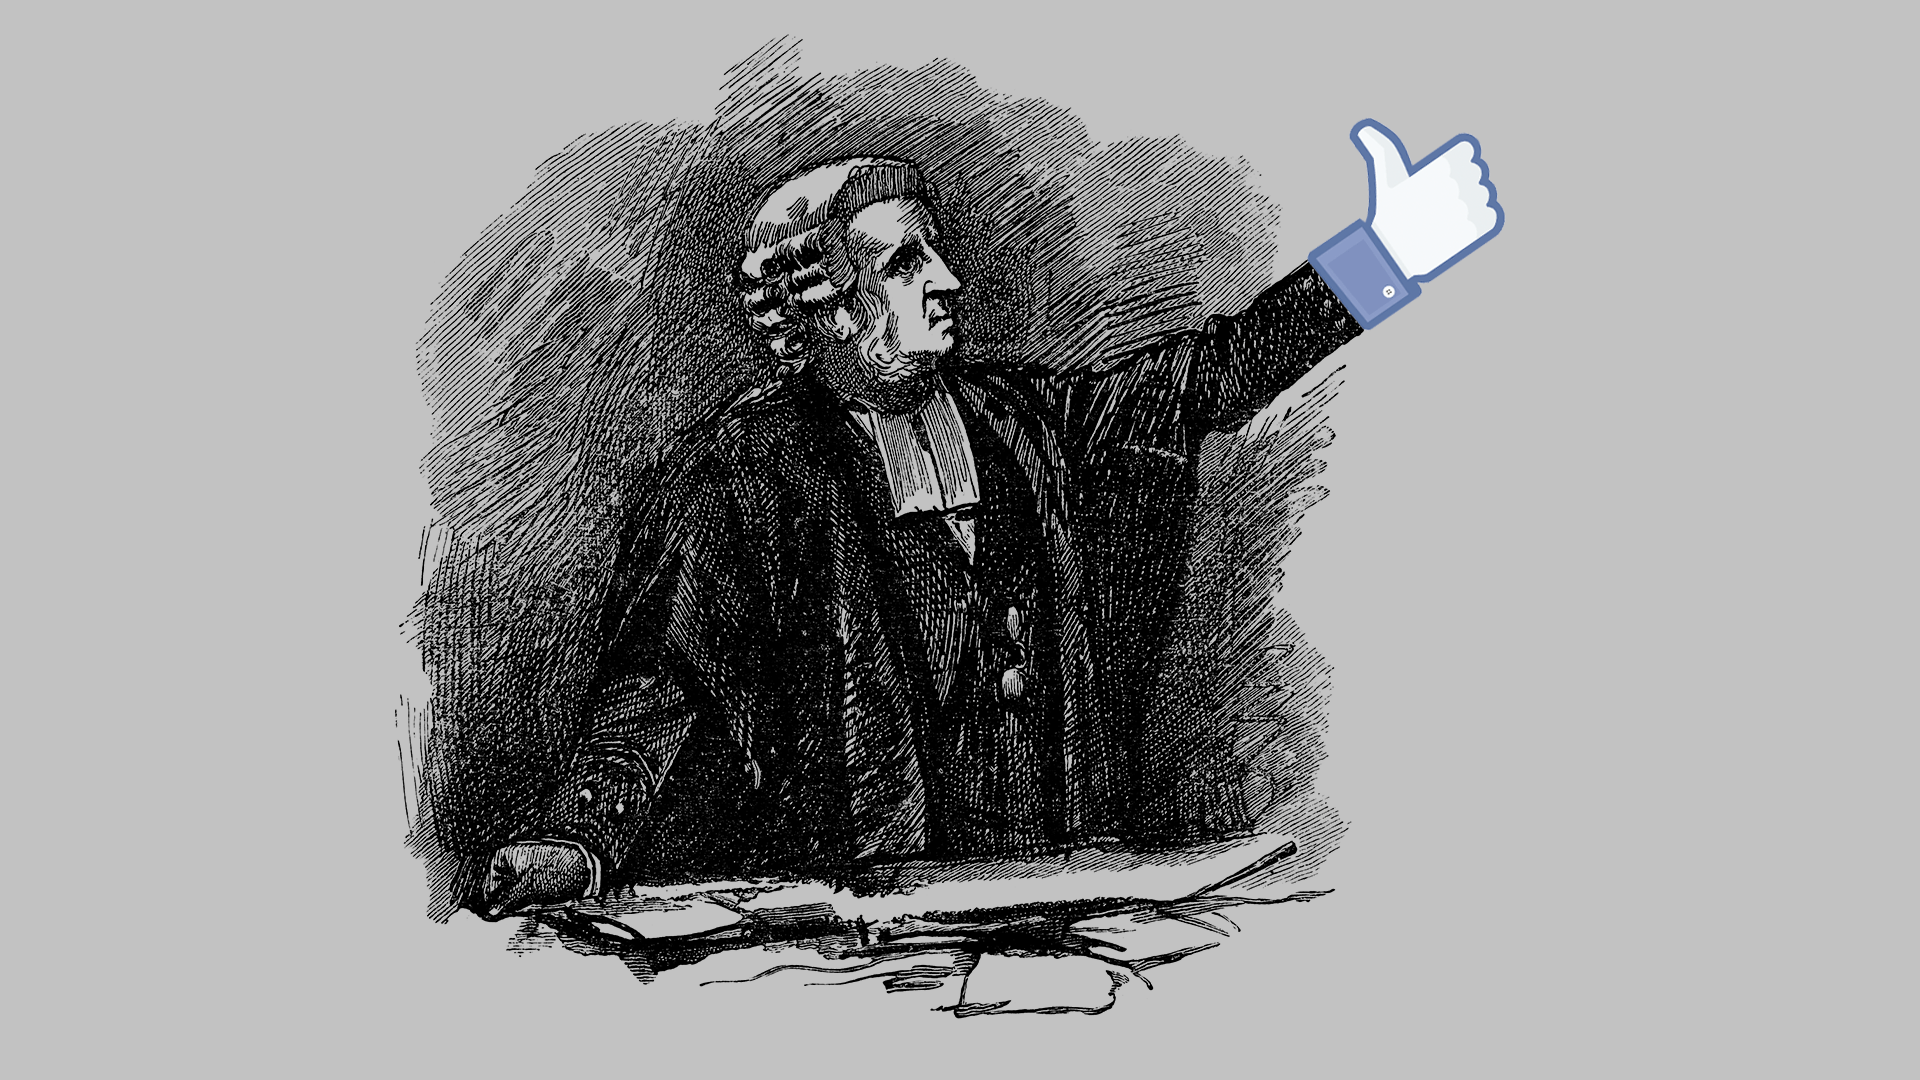 Illustration of an old-fashioned etching of a legislator with a Facebook "like" thumbs up hand